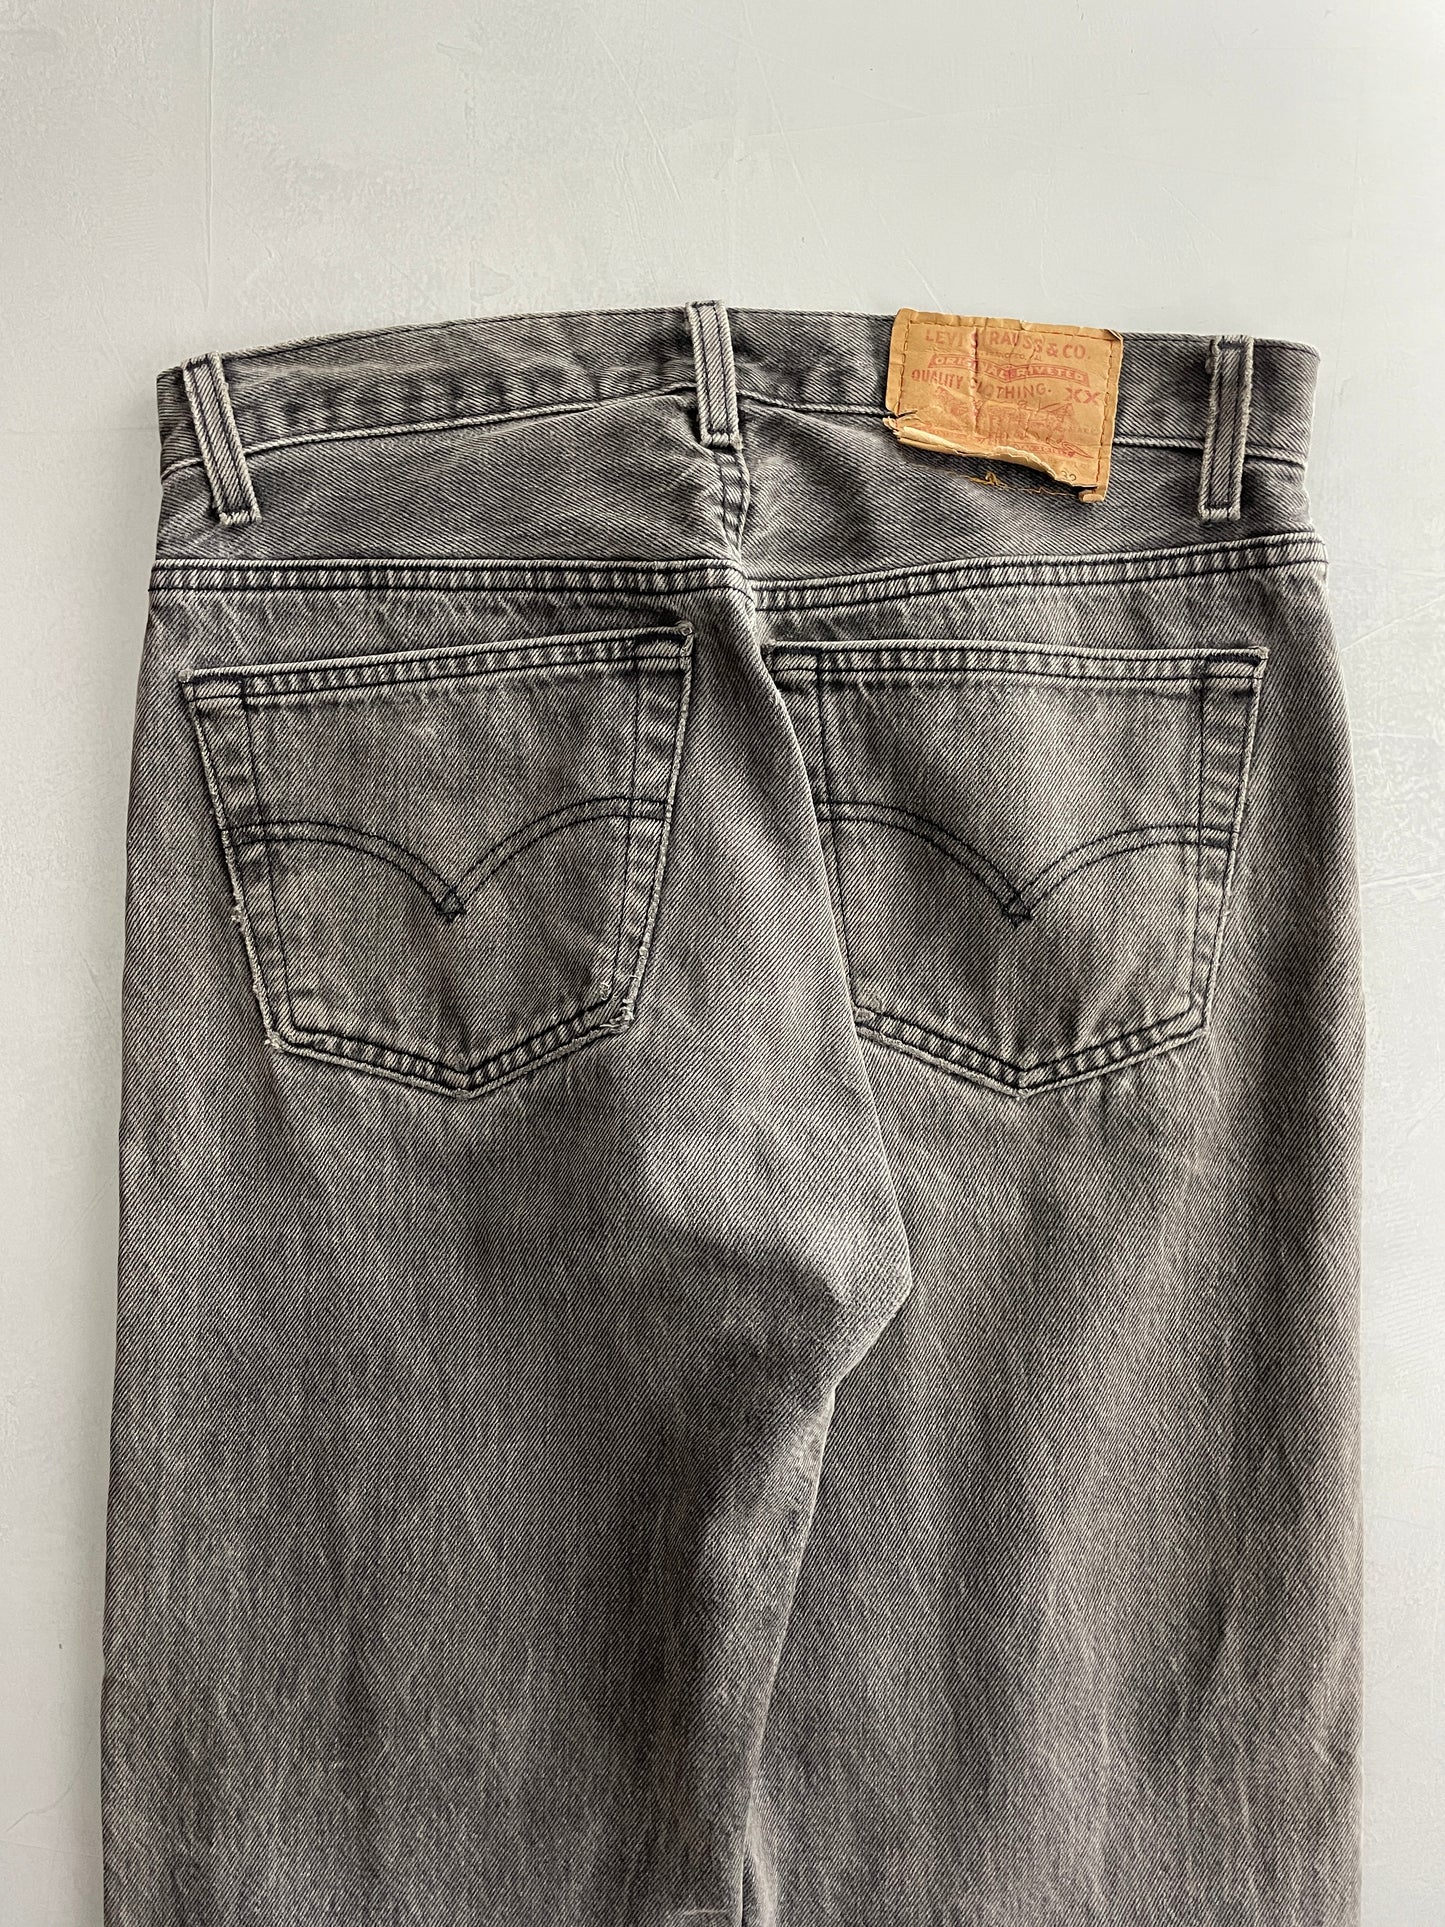 Made in USA Levi's 501's [31"]